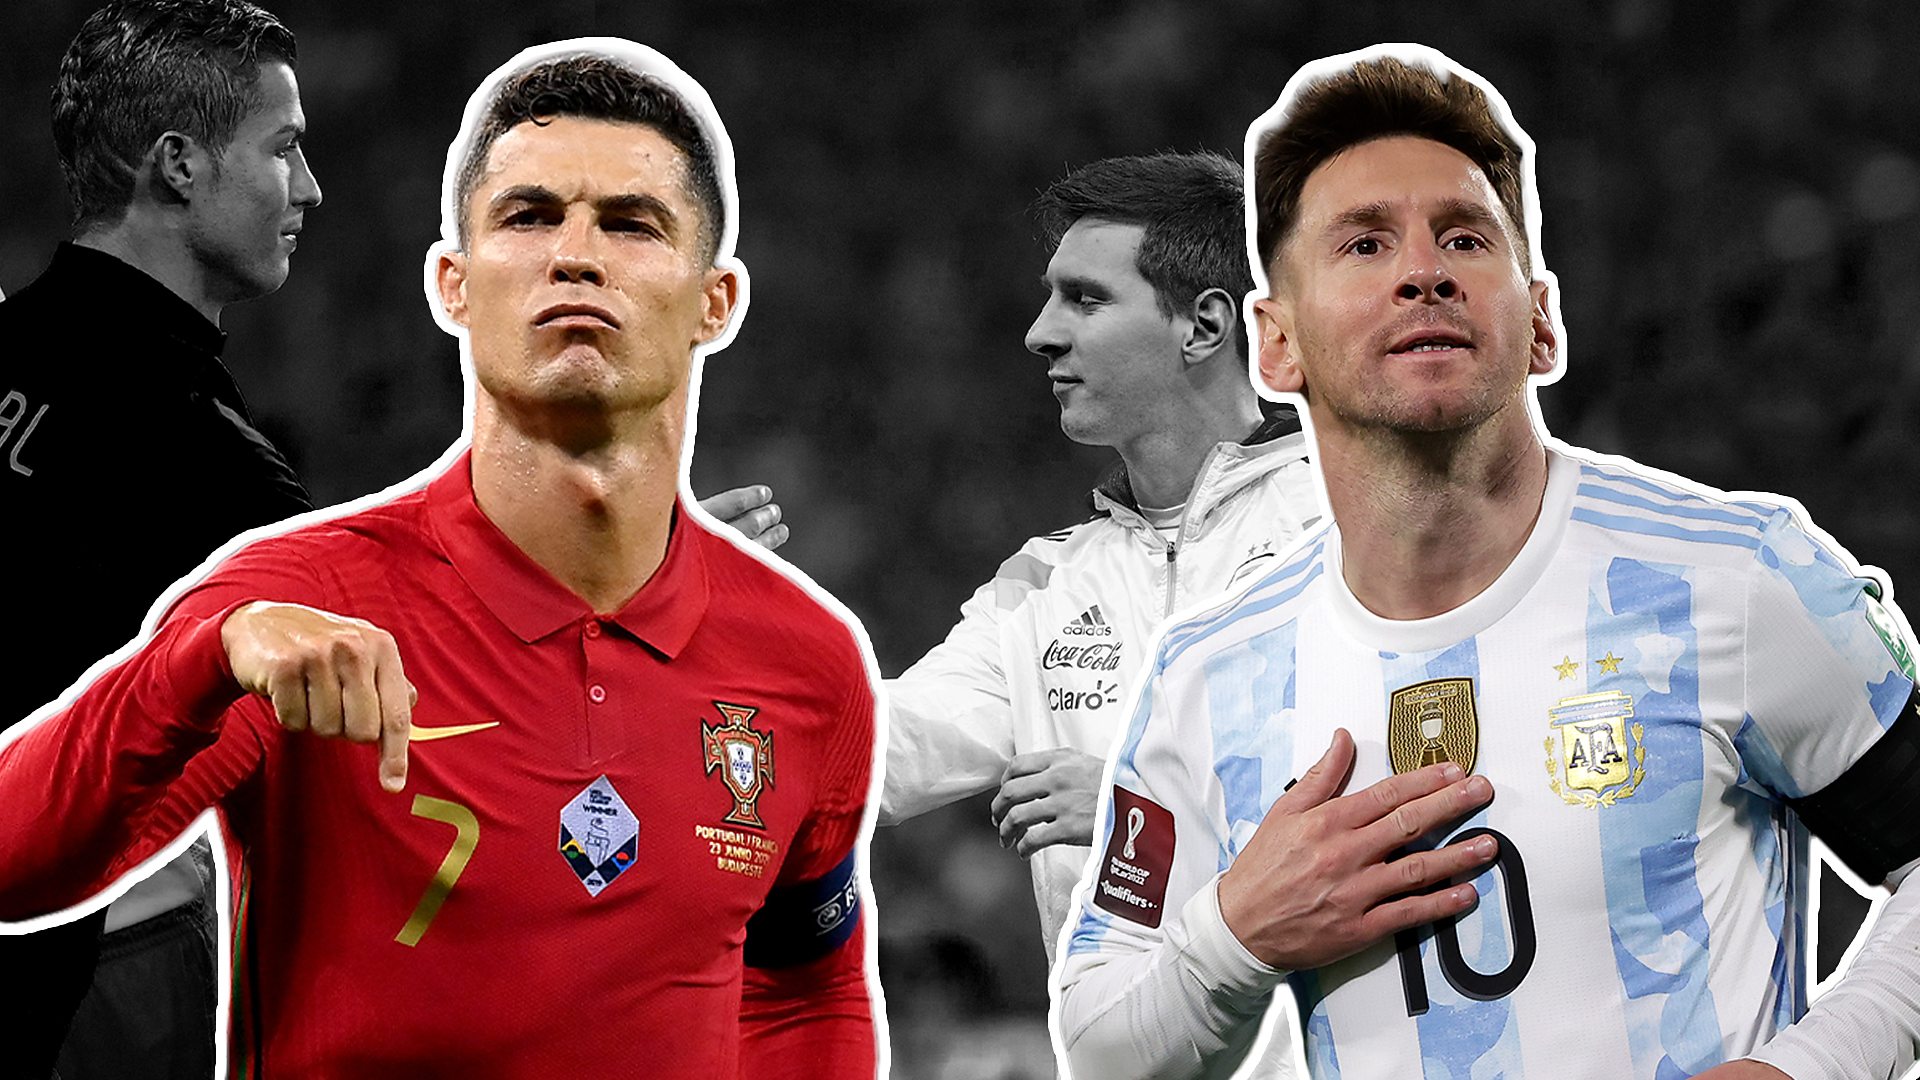 Lionel Messi v Cristiano Ronaldo Who is the greatest of all time?